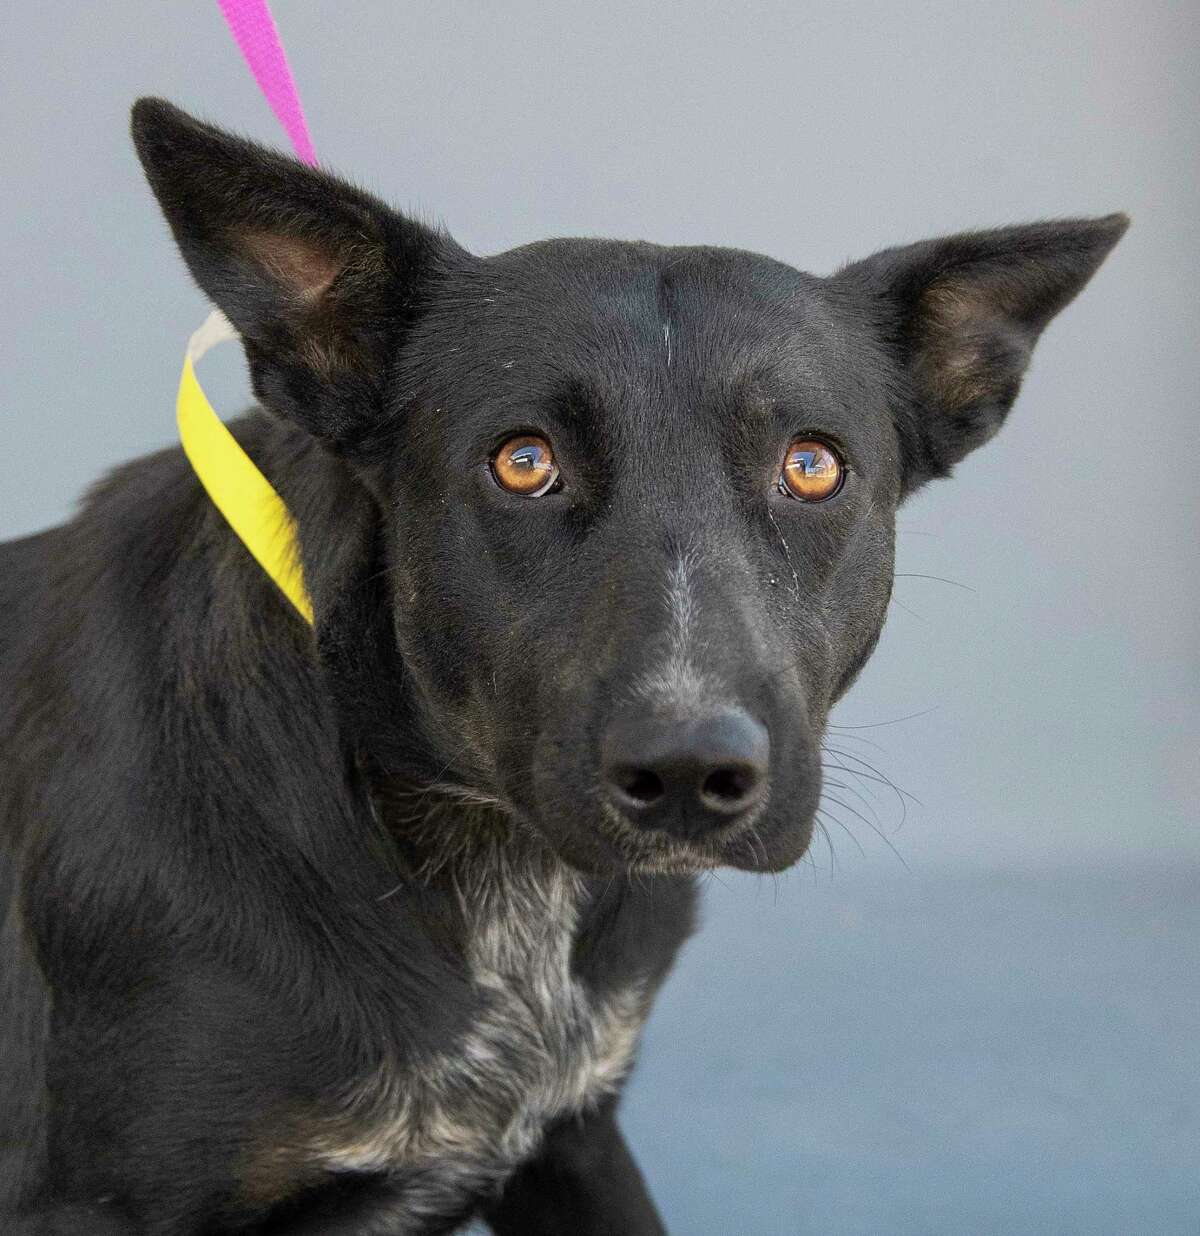 Sombra (A564117) is a 1-year-old, Australian cattle dog mix, available for adoption from Harris County Pets.